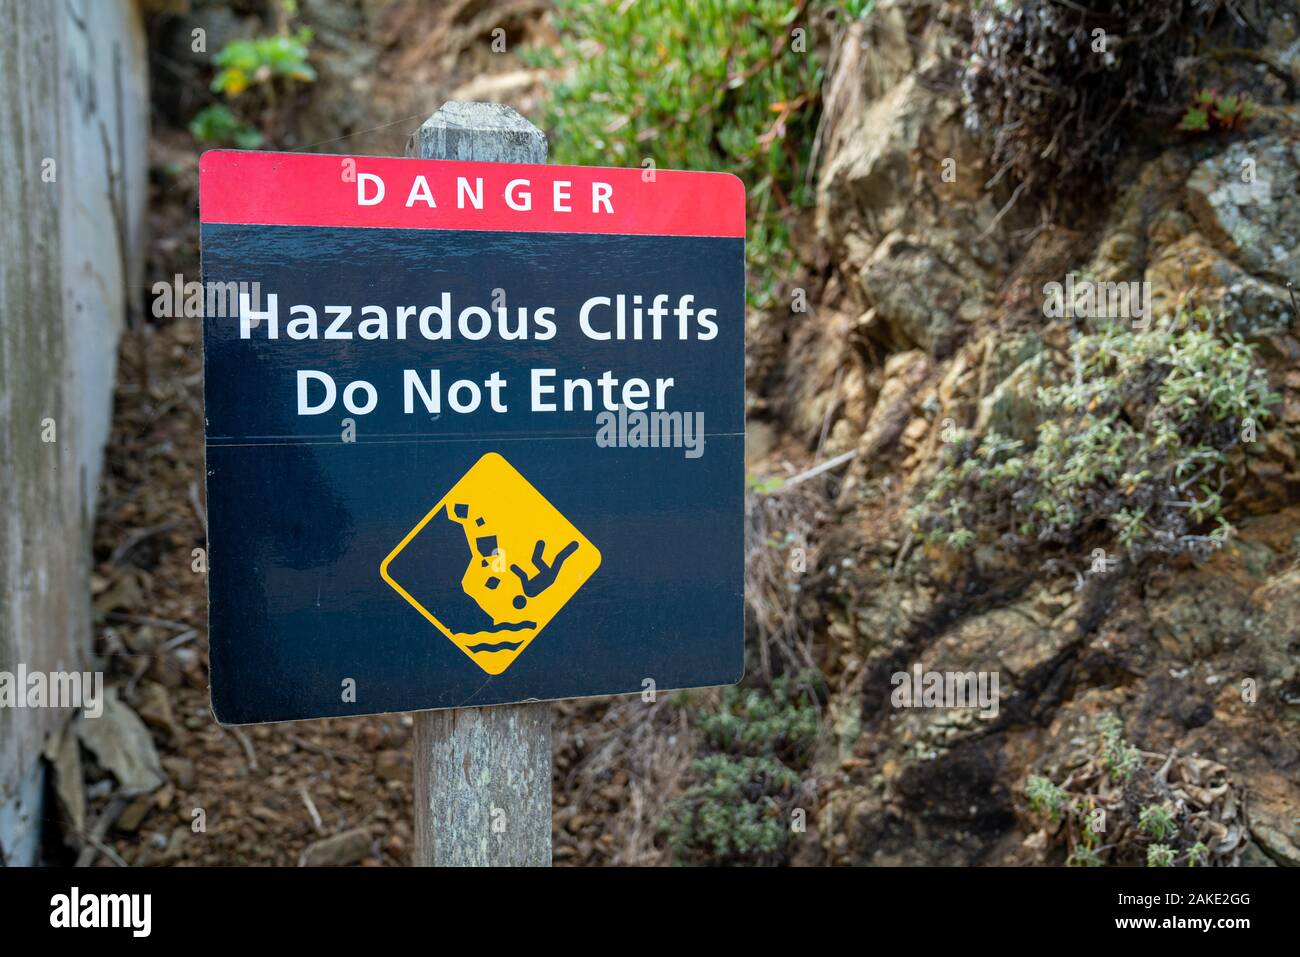 Danger hazardous cliffs do not enter with person falling sign on wooden post leading up hill Stock Photo